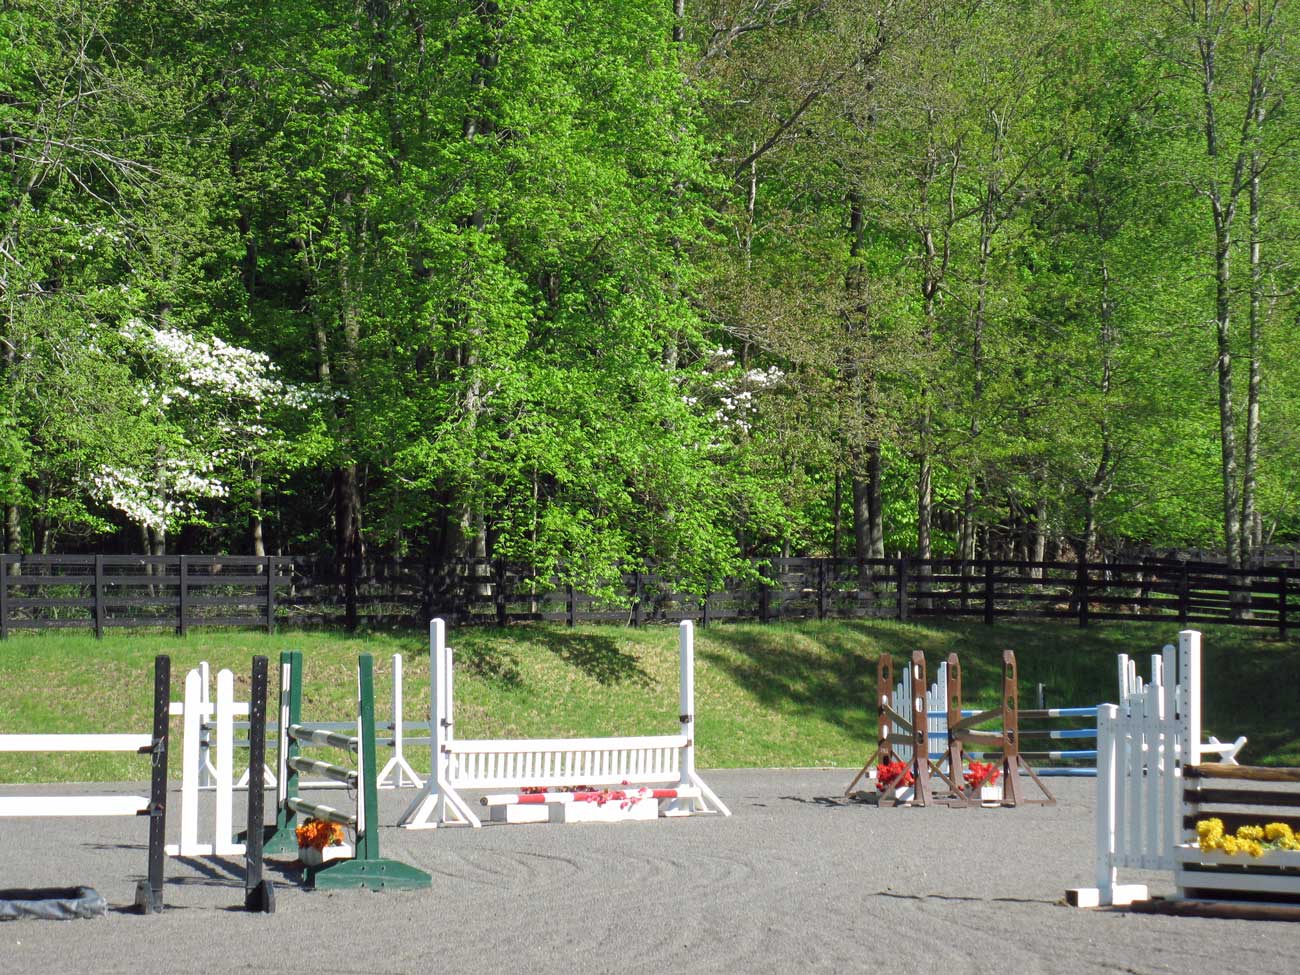 View of outdoor ring with course of jumps